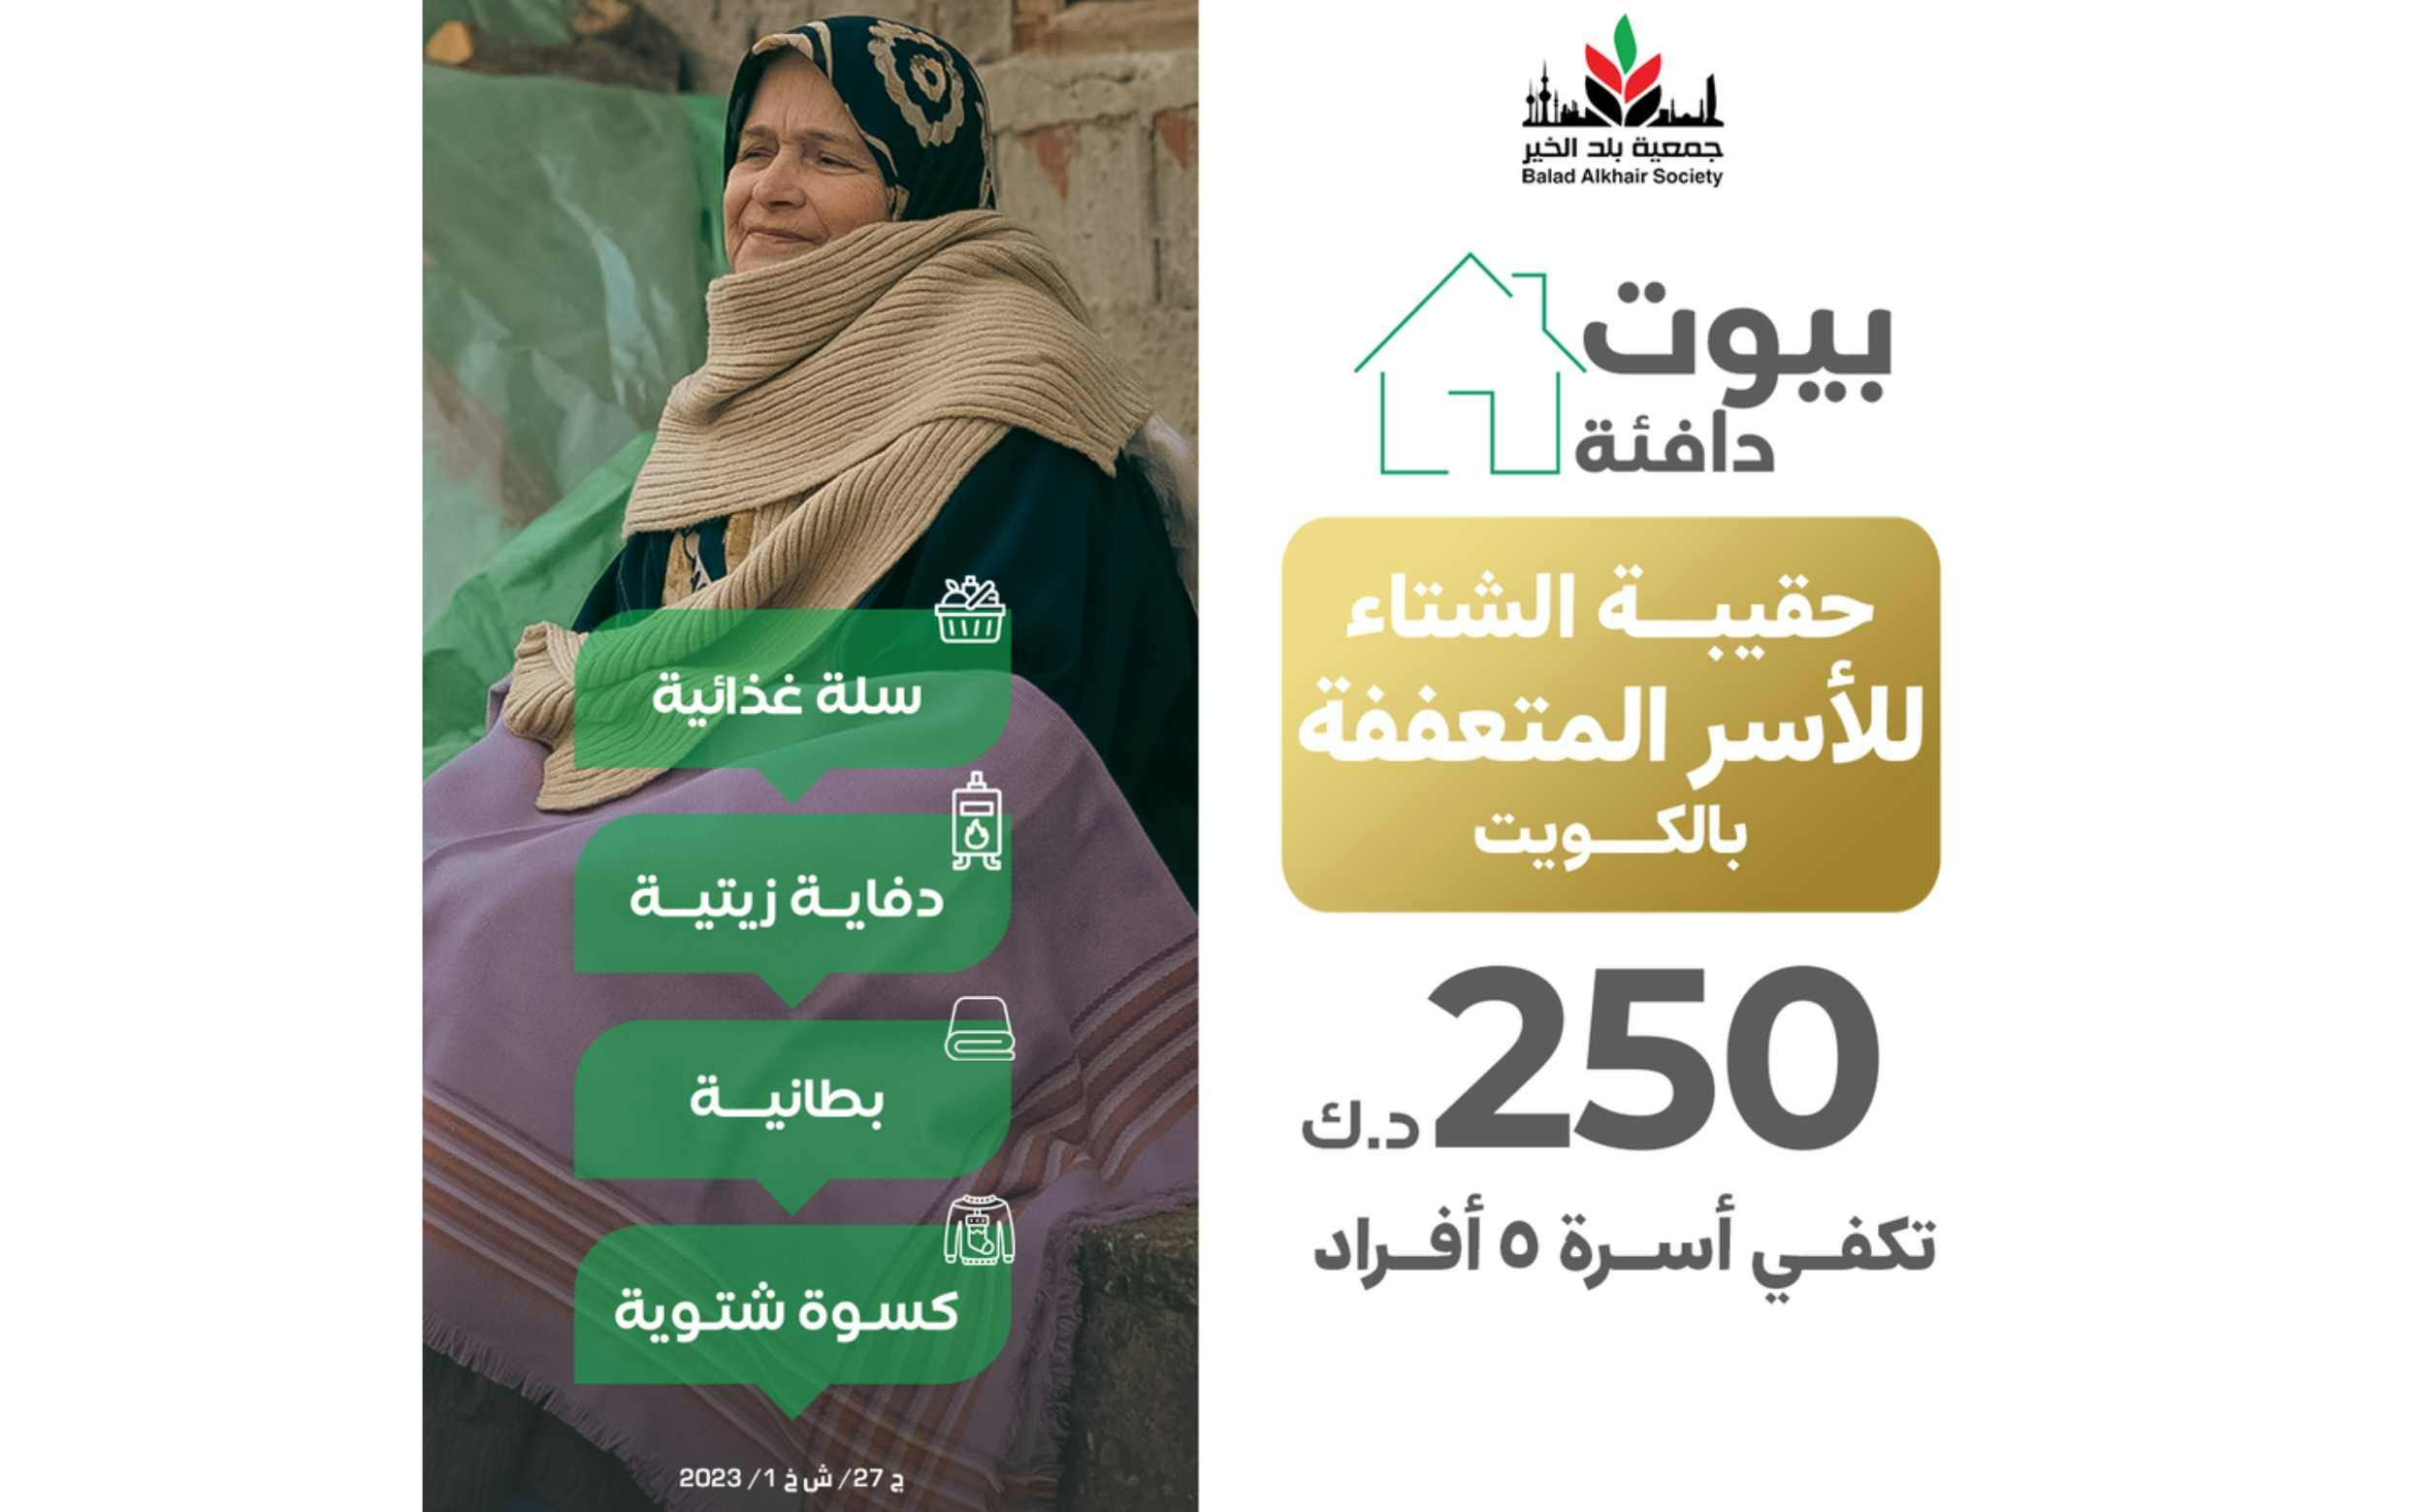 Warm homes for needy families inside the State of Kuwait - Zakat is permissible - photo